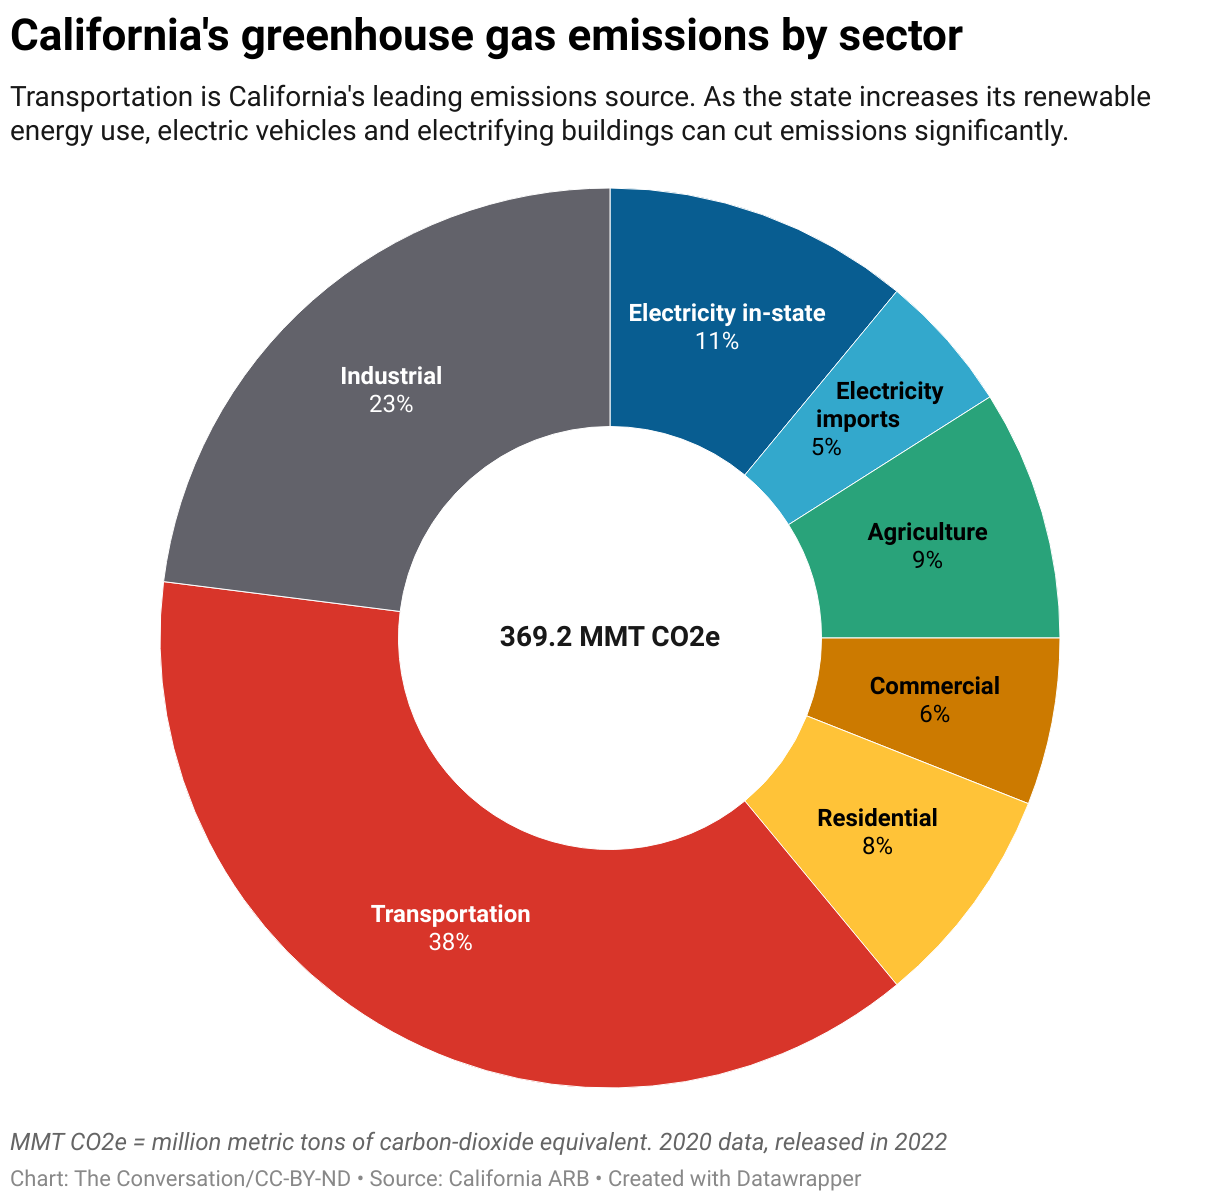 California has an ambitious new climate plan &ndash; here's how it could spur action worldwide